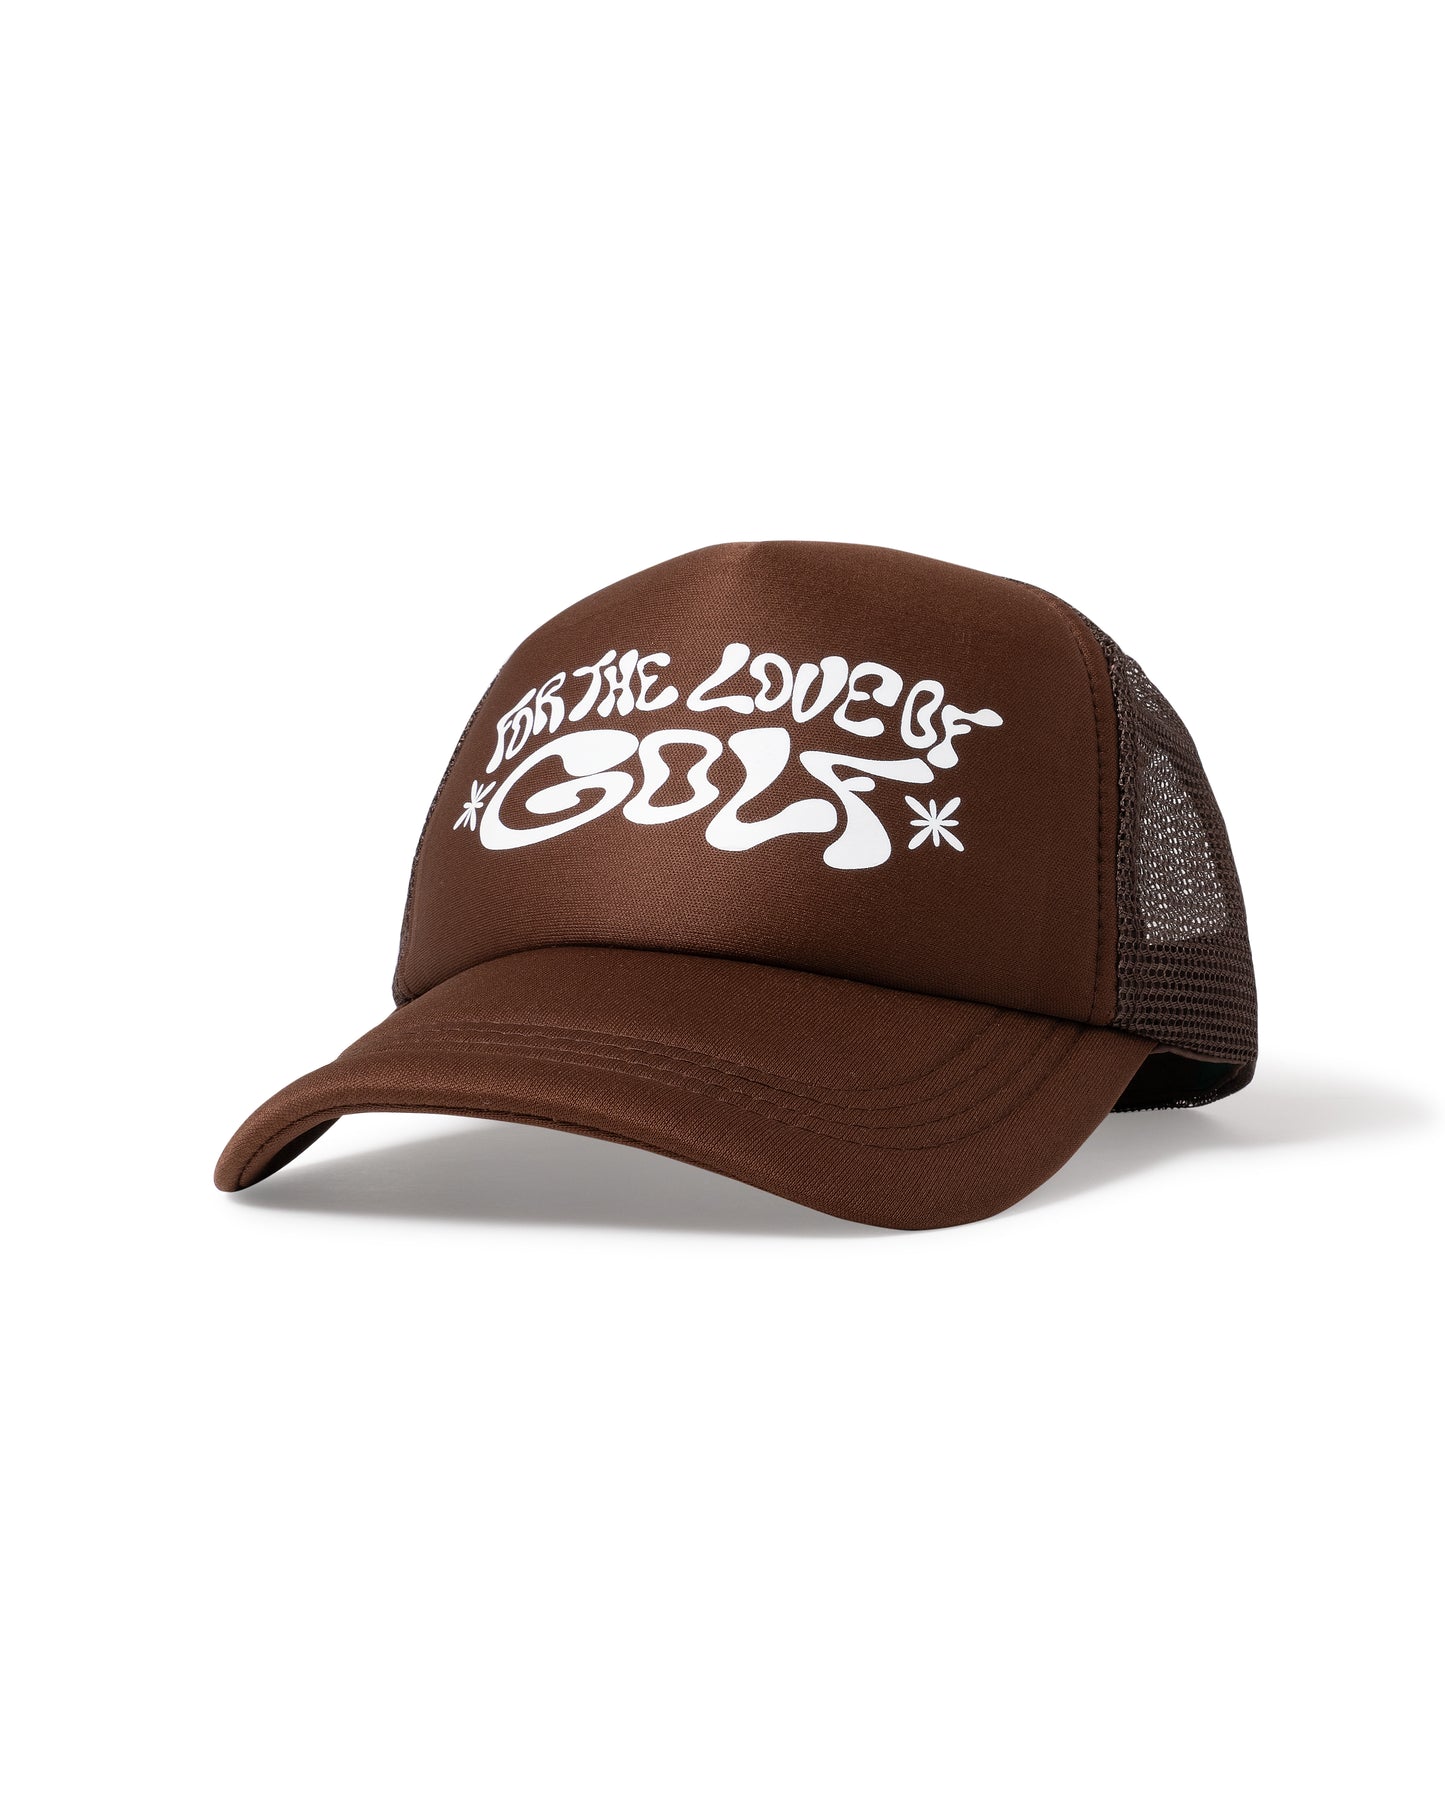 Loom 19 x Mid 90s Club: For The Love Of Golf Trucker Cap